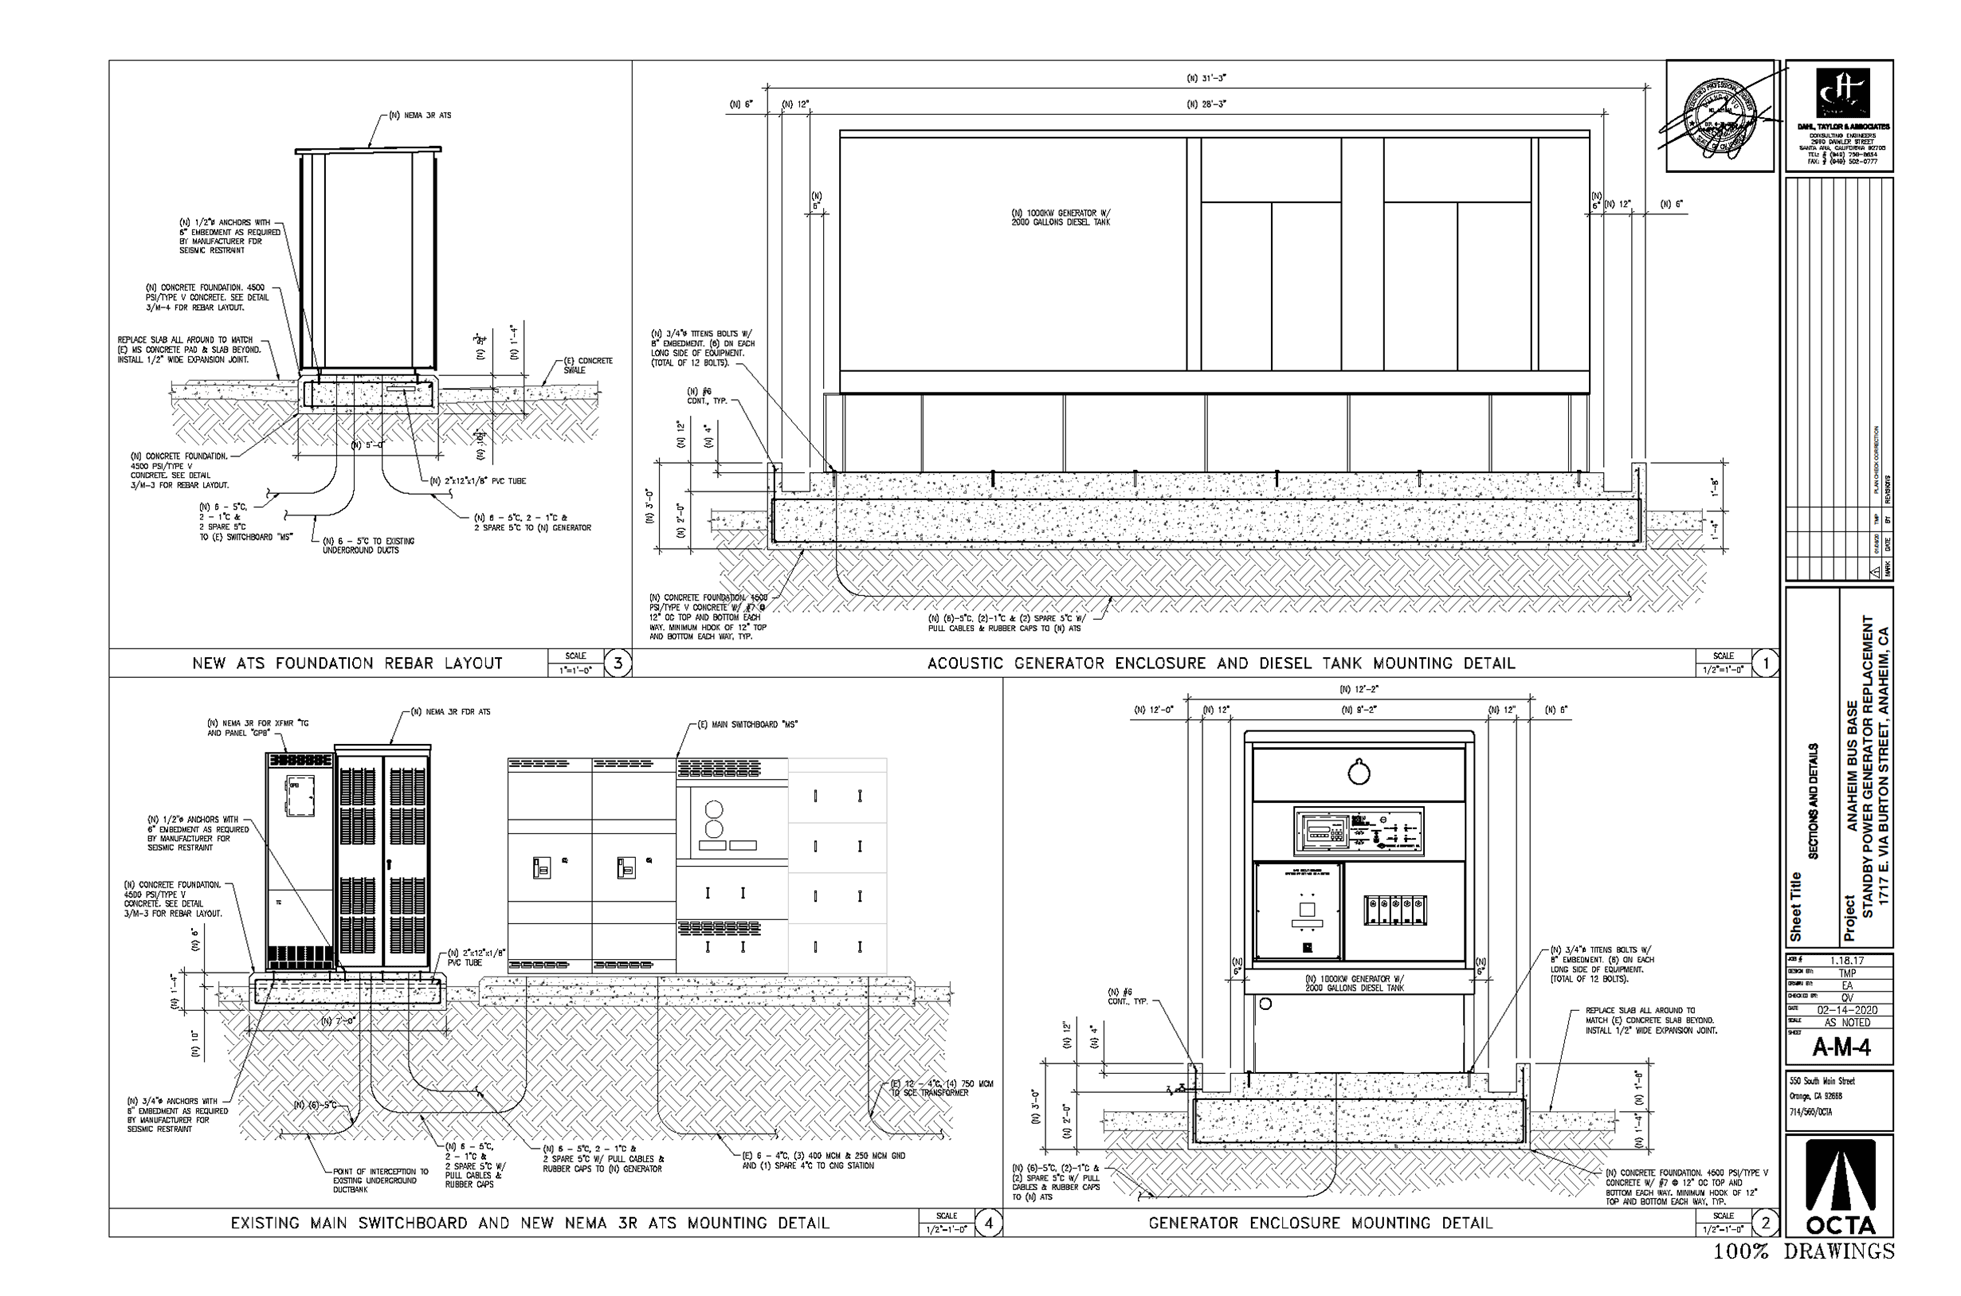 Plan View and Elevation